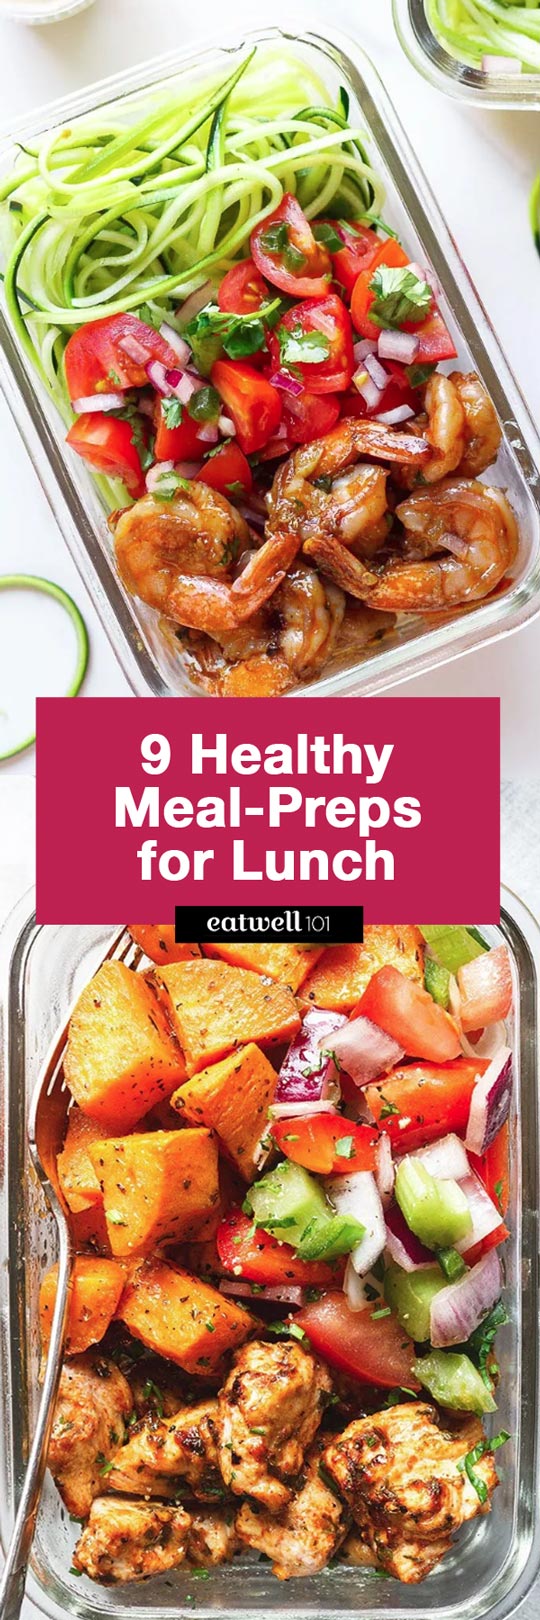 https://www.eatwell101.com/wp-content/uploads/2019/01/Healthy-Meal-Prep-Recipes.jpg